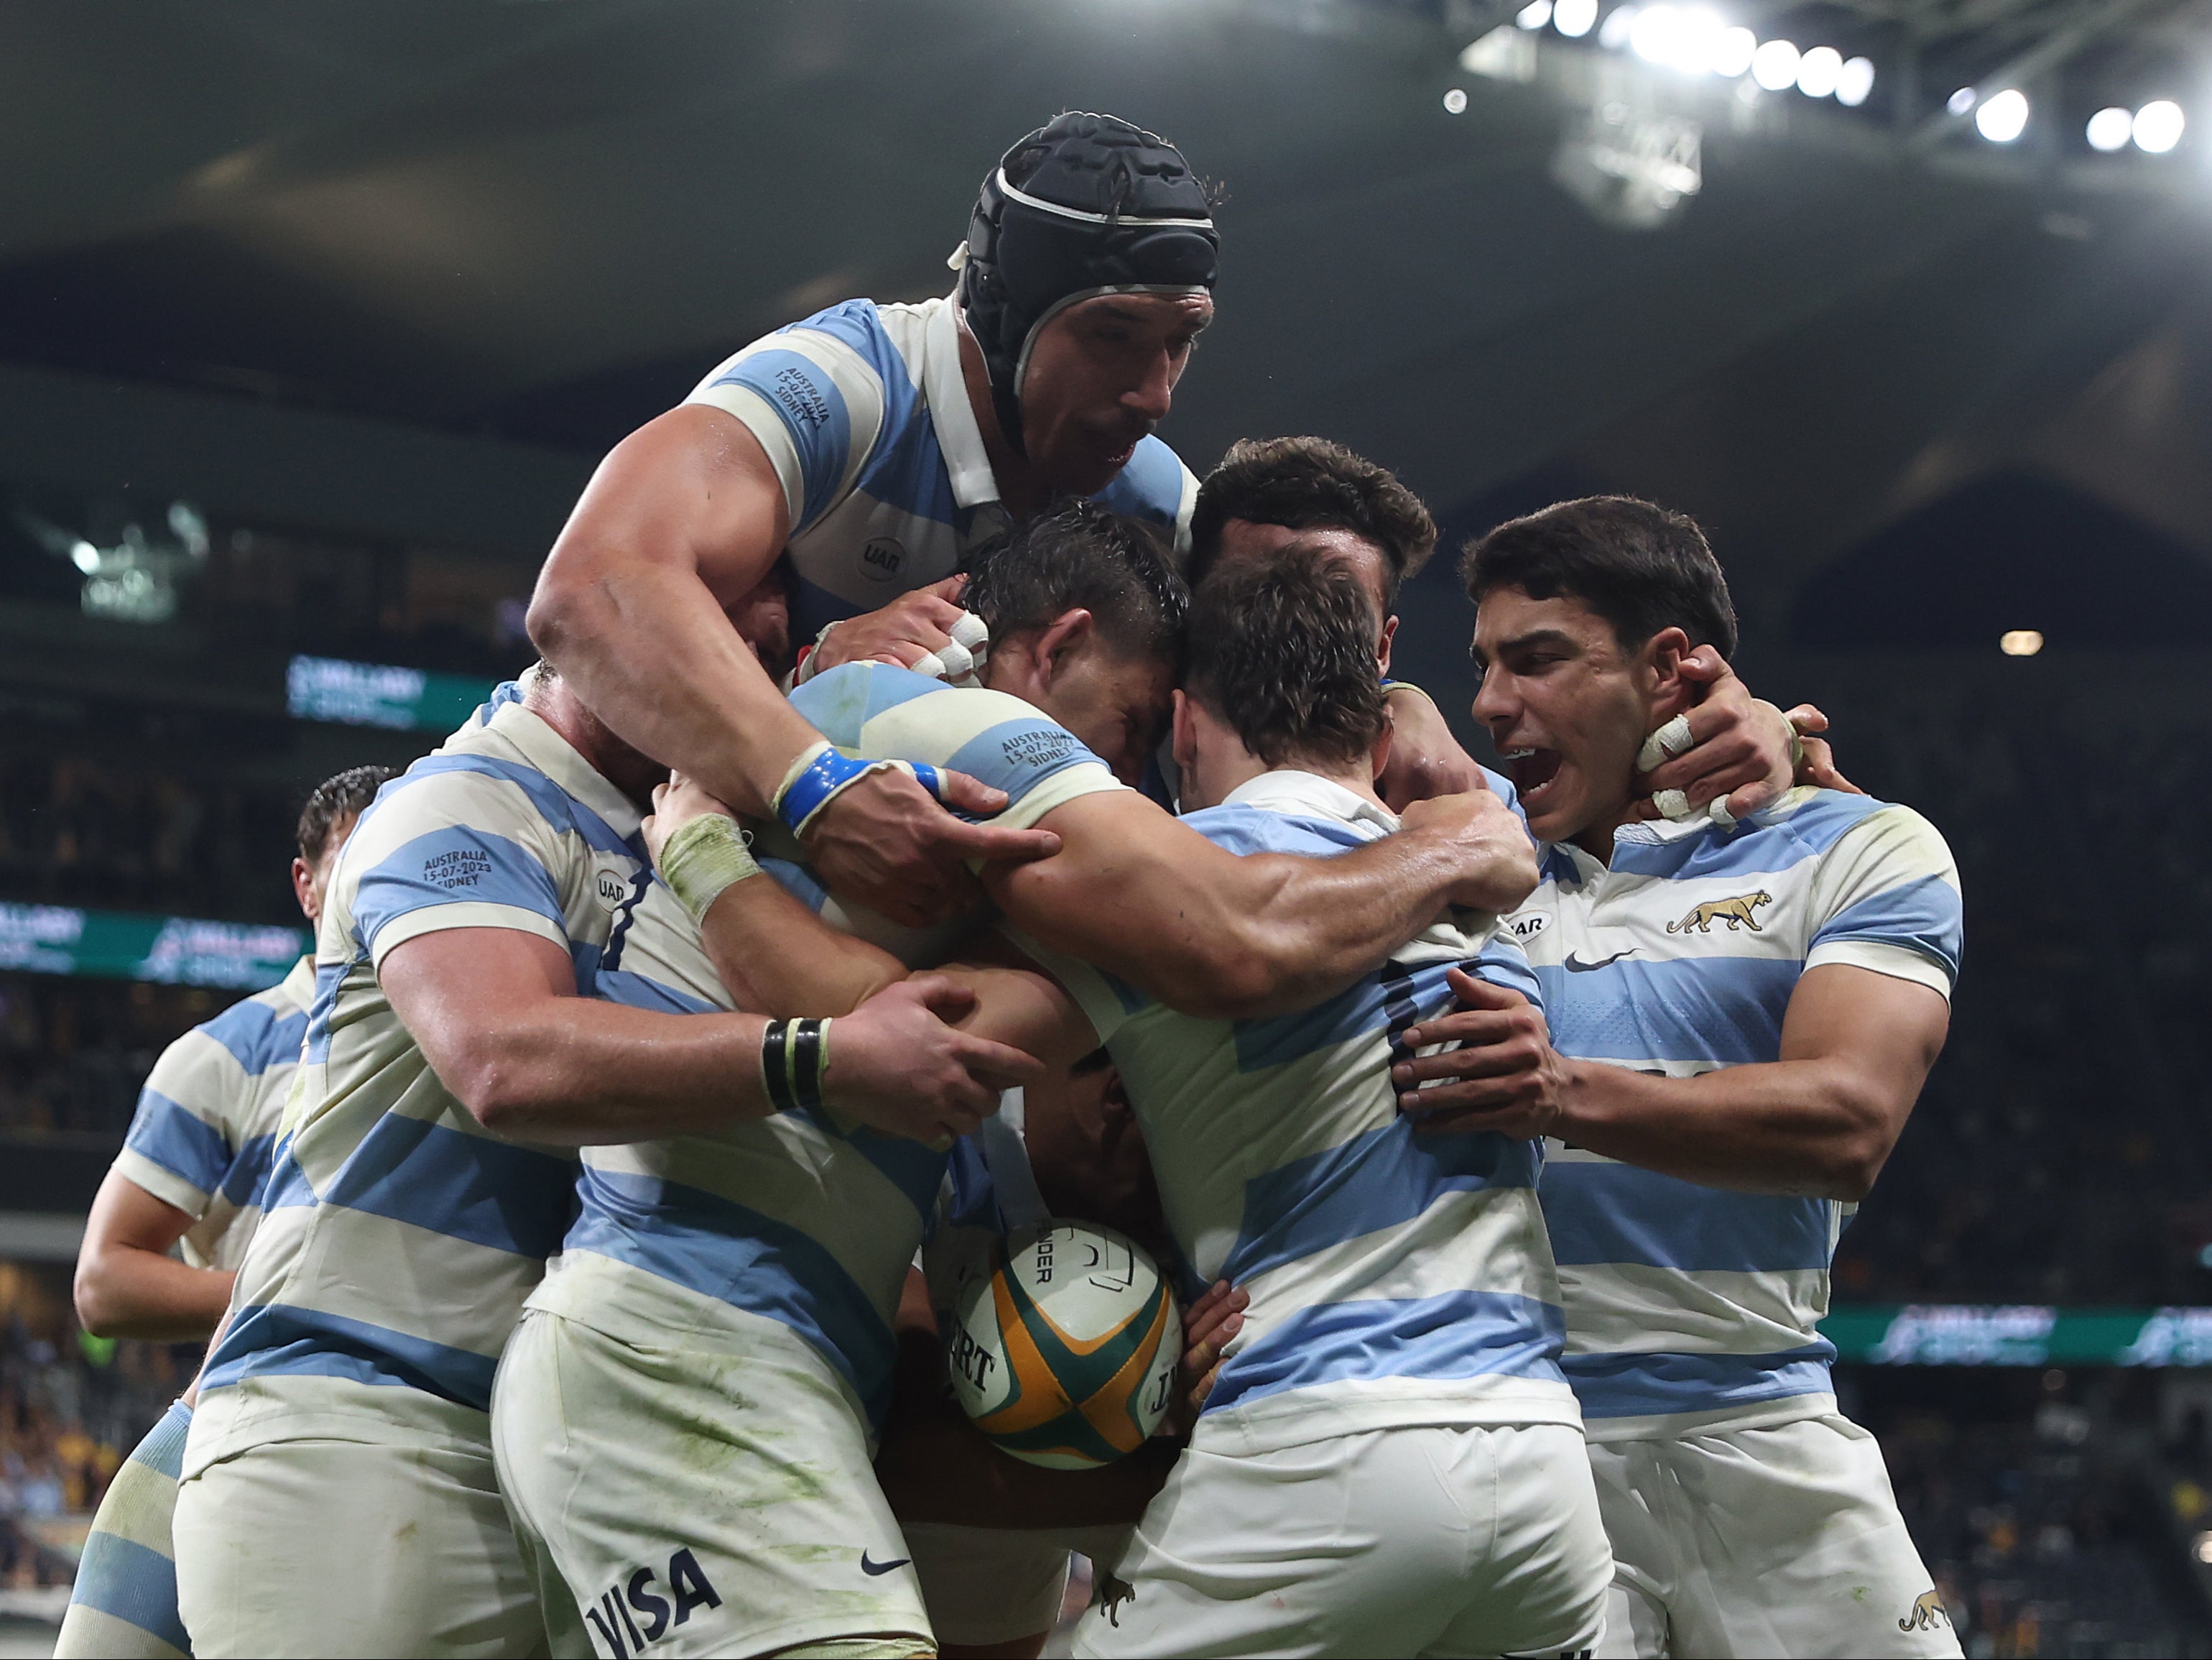 The Pumas celebrated a remarkable win